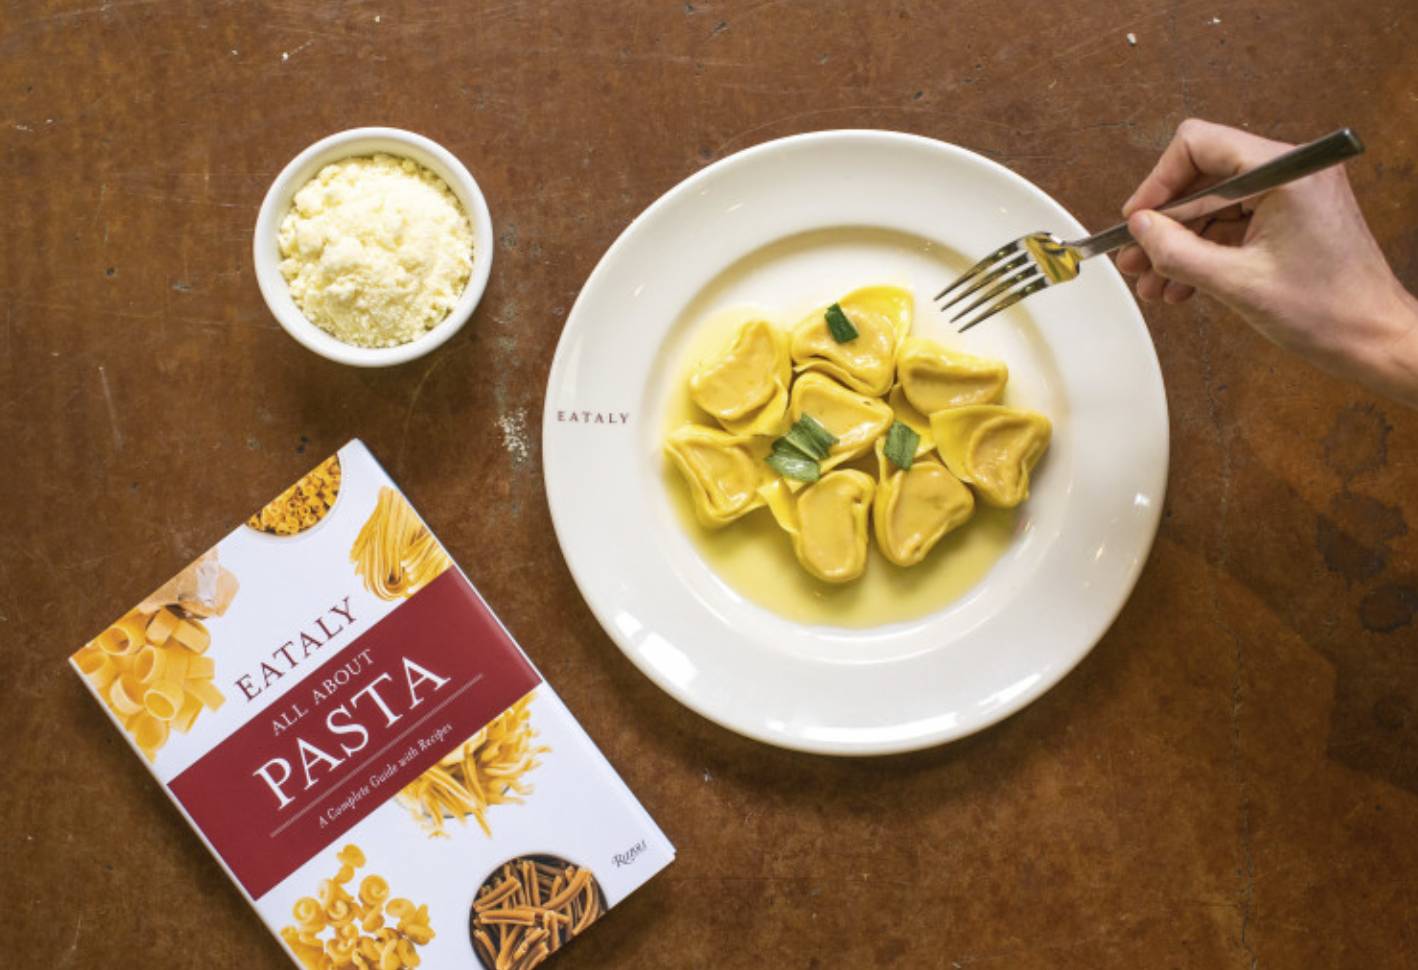 eataly ravioli with cheese and "all about pasta" cookbook